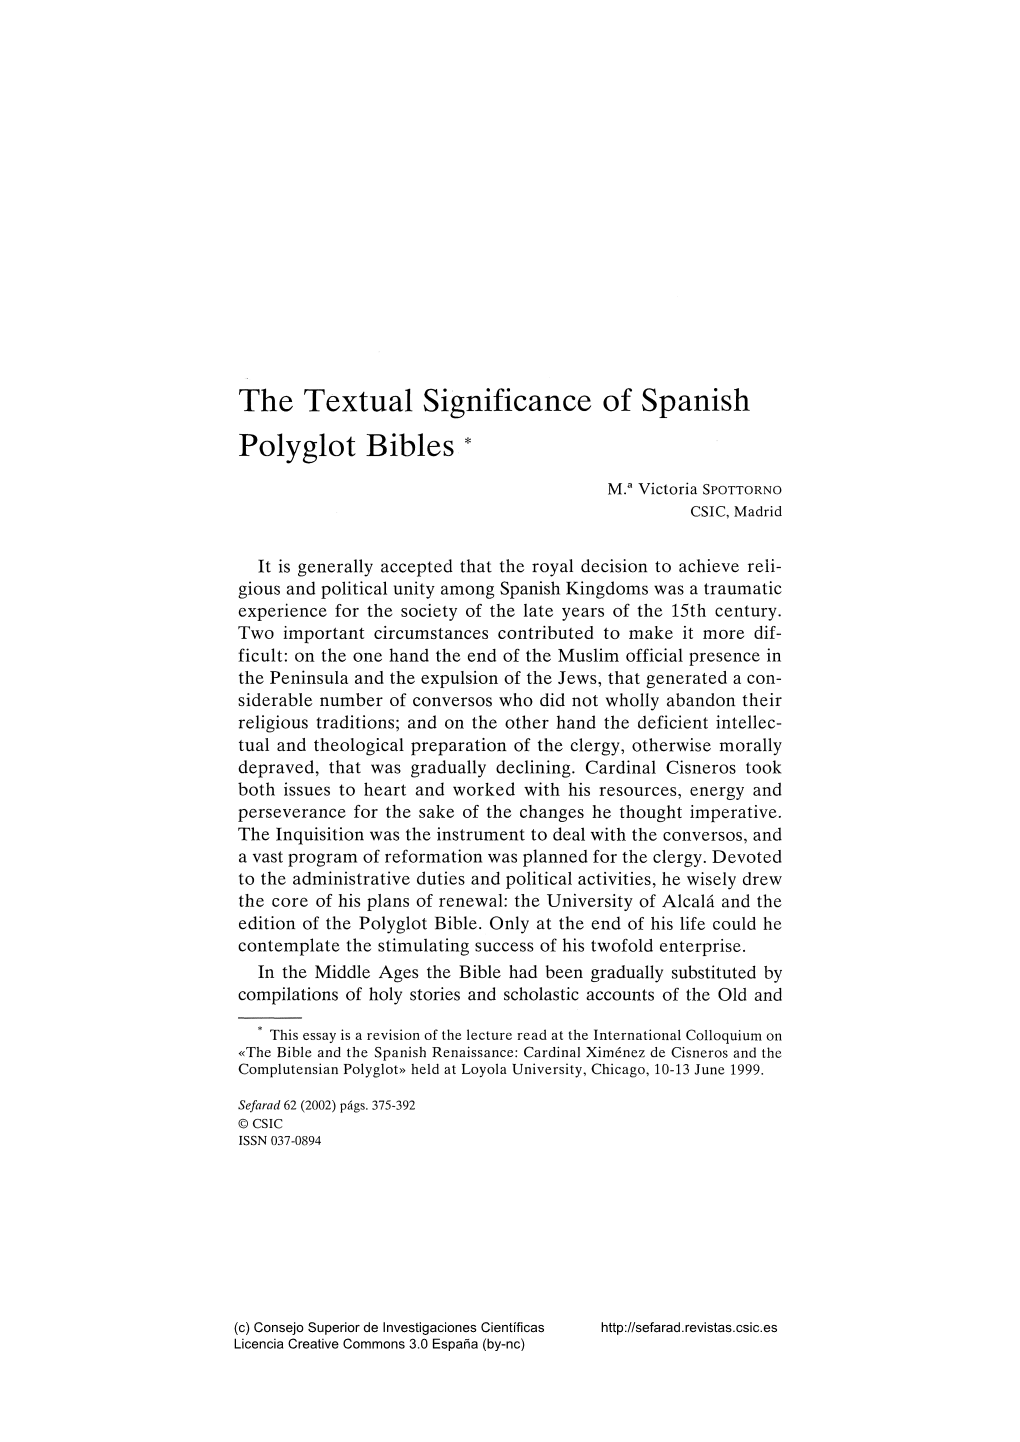 The Textual Significance of Spanish Polyglot Bibles *